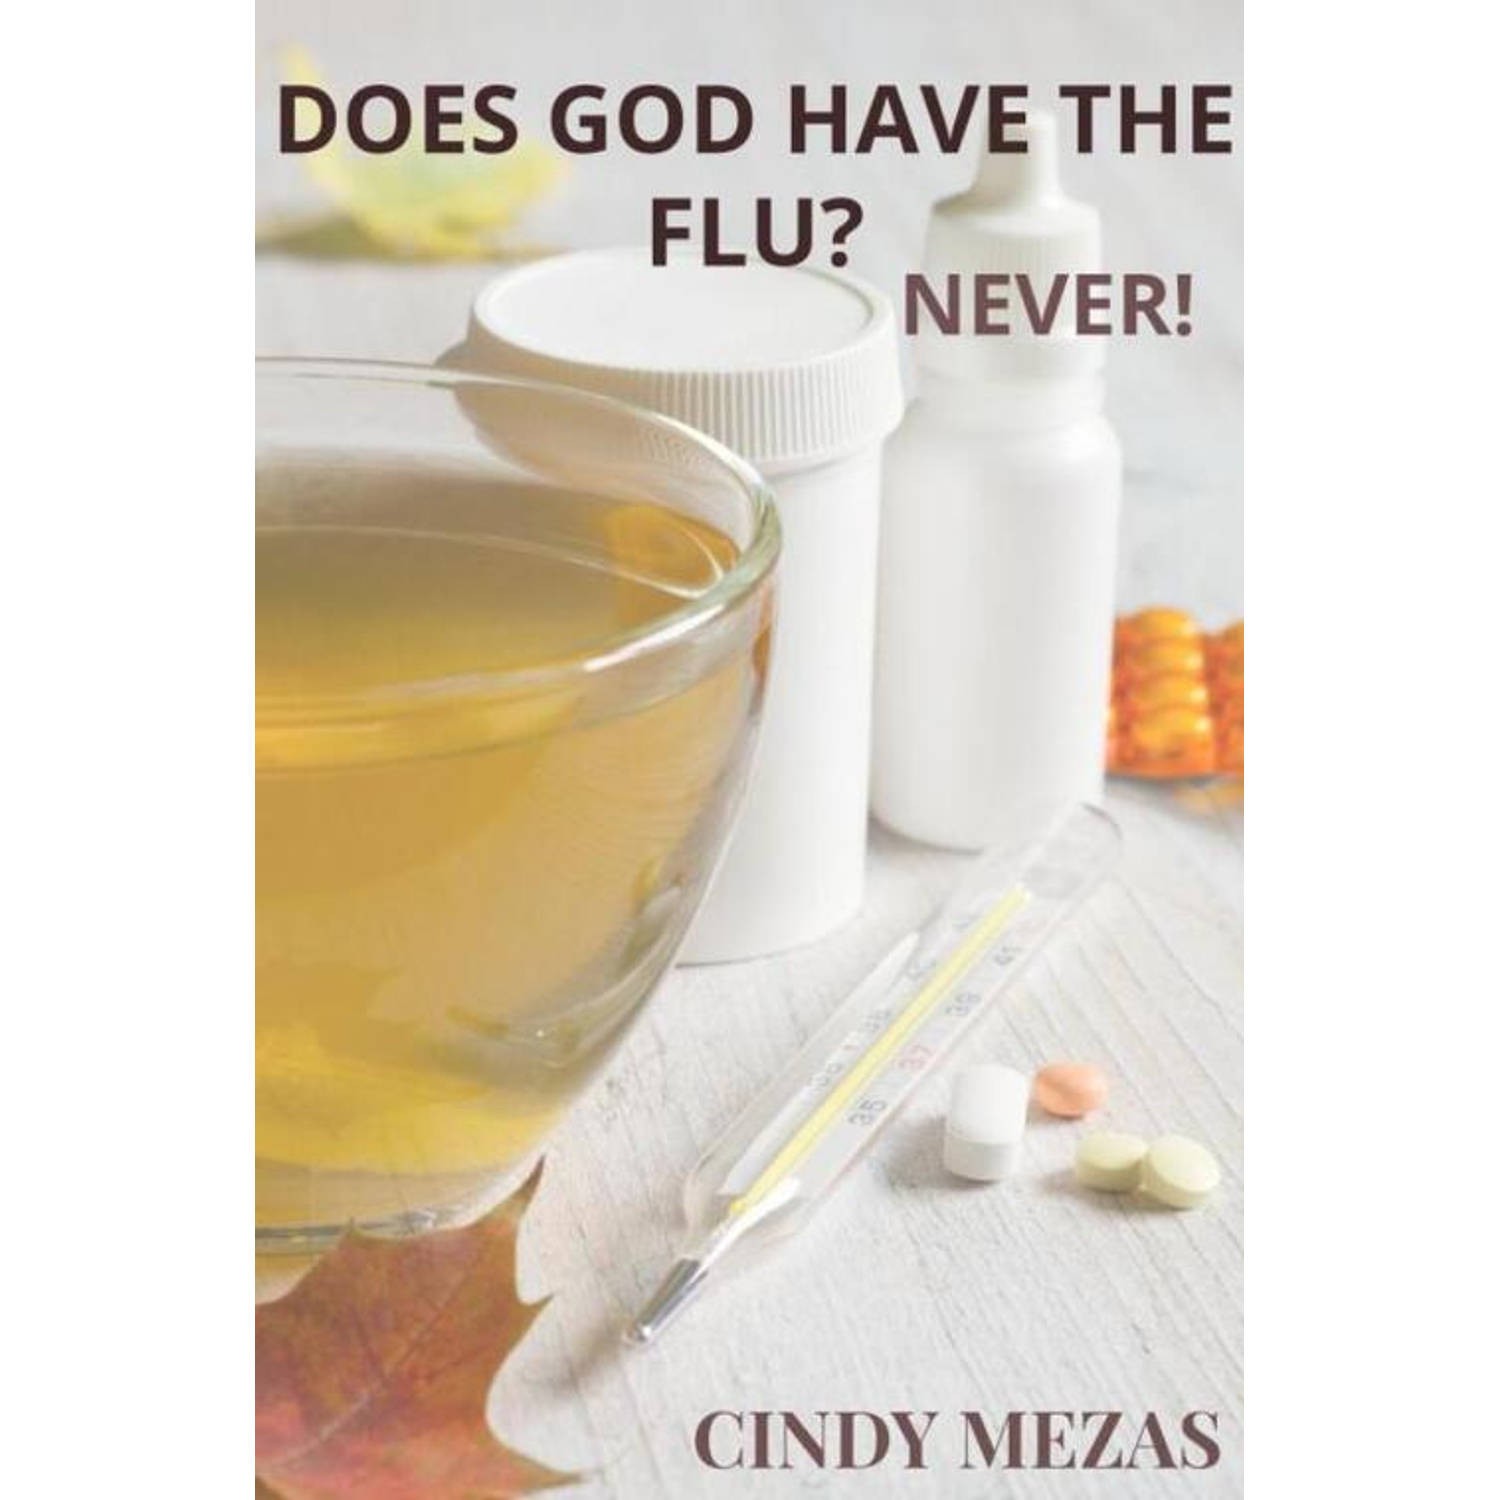 Does God Have The Flu?